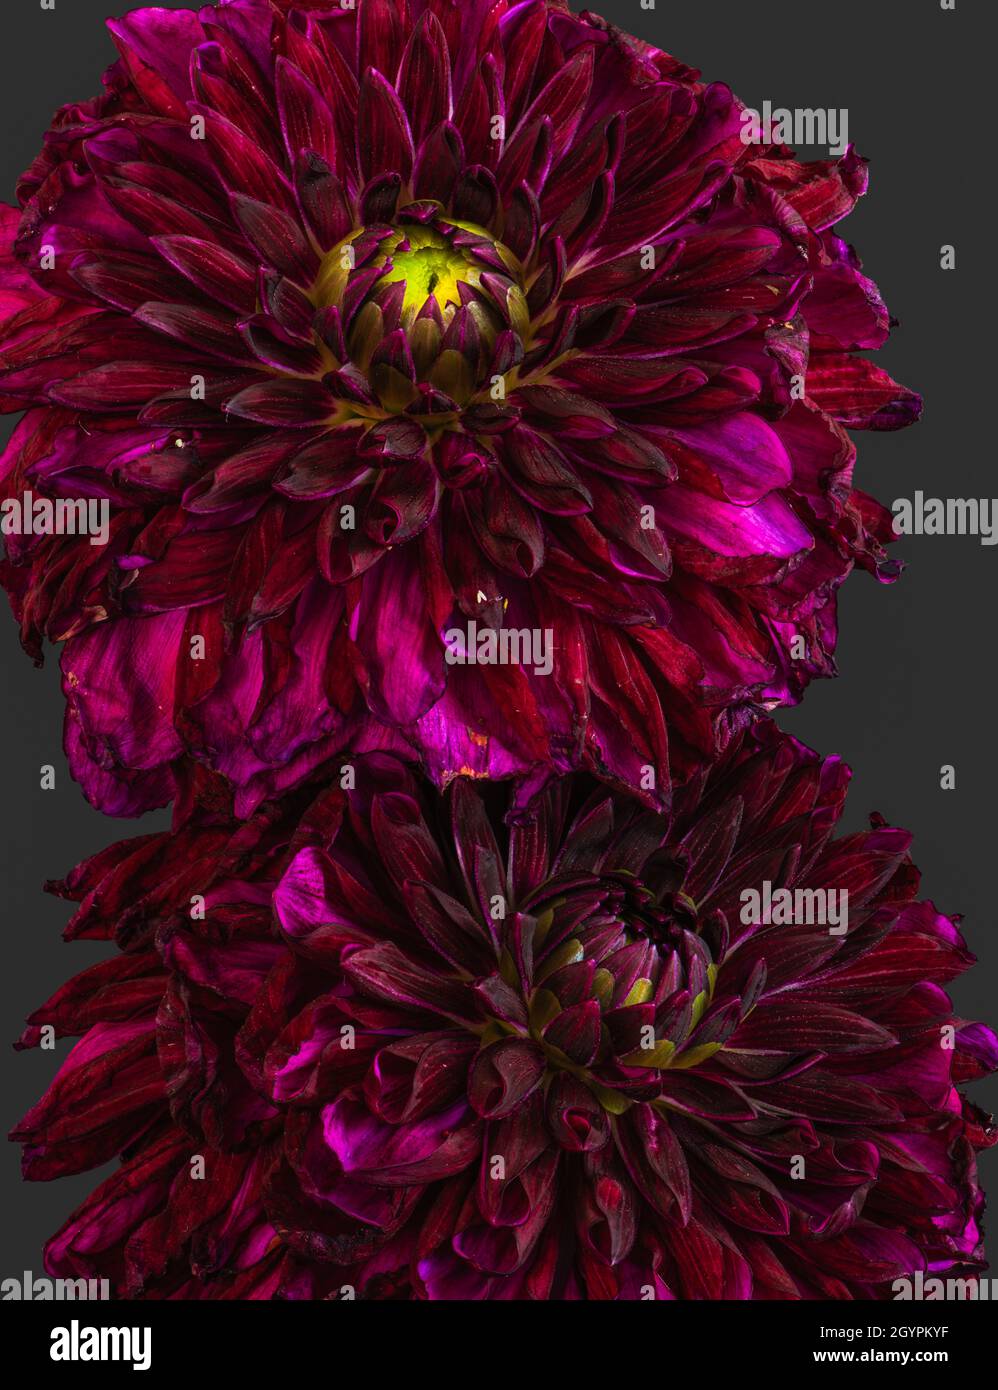 Front view macro of a pair of red dahlia blooms cut-out on dark gray background Stock Photo